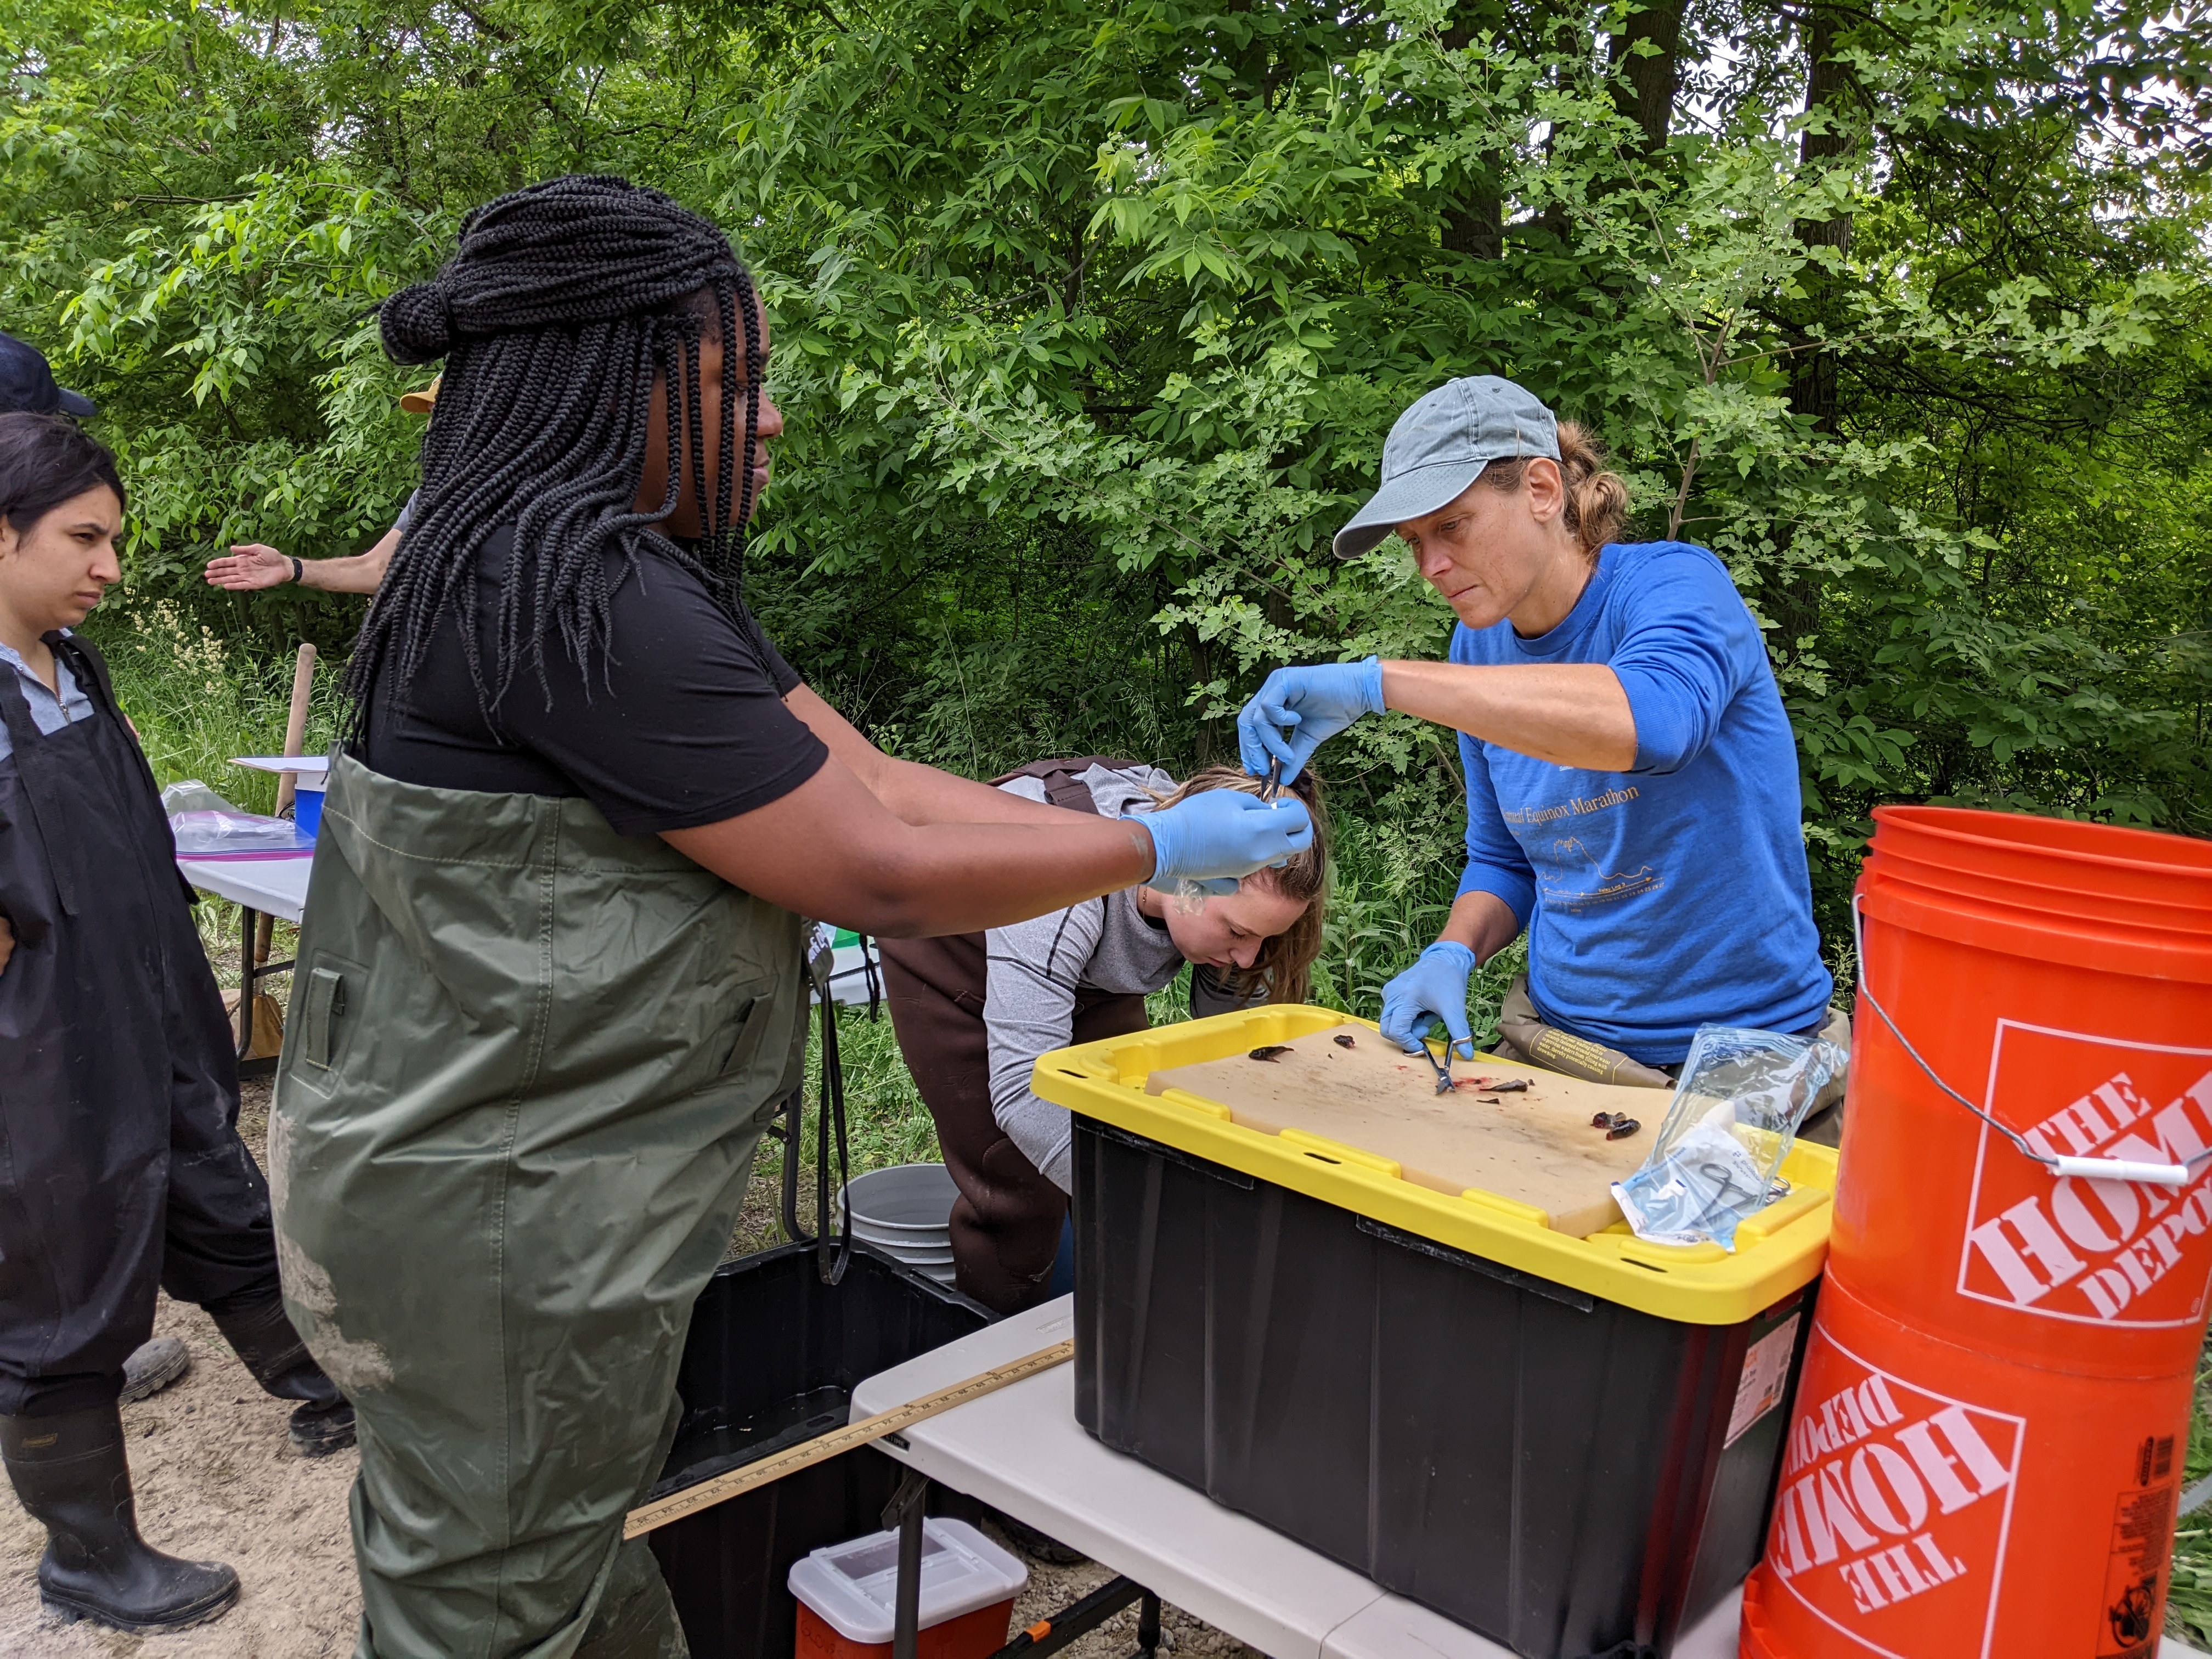 Dr. Baker, right, works in the field with colleagues and students to sample fish in the Detroit River. Photo courtesy of Healthy Urban Waters.